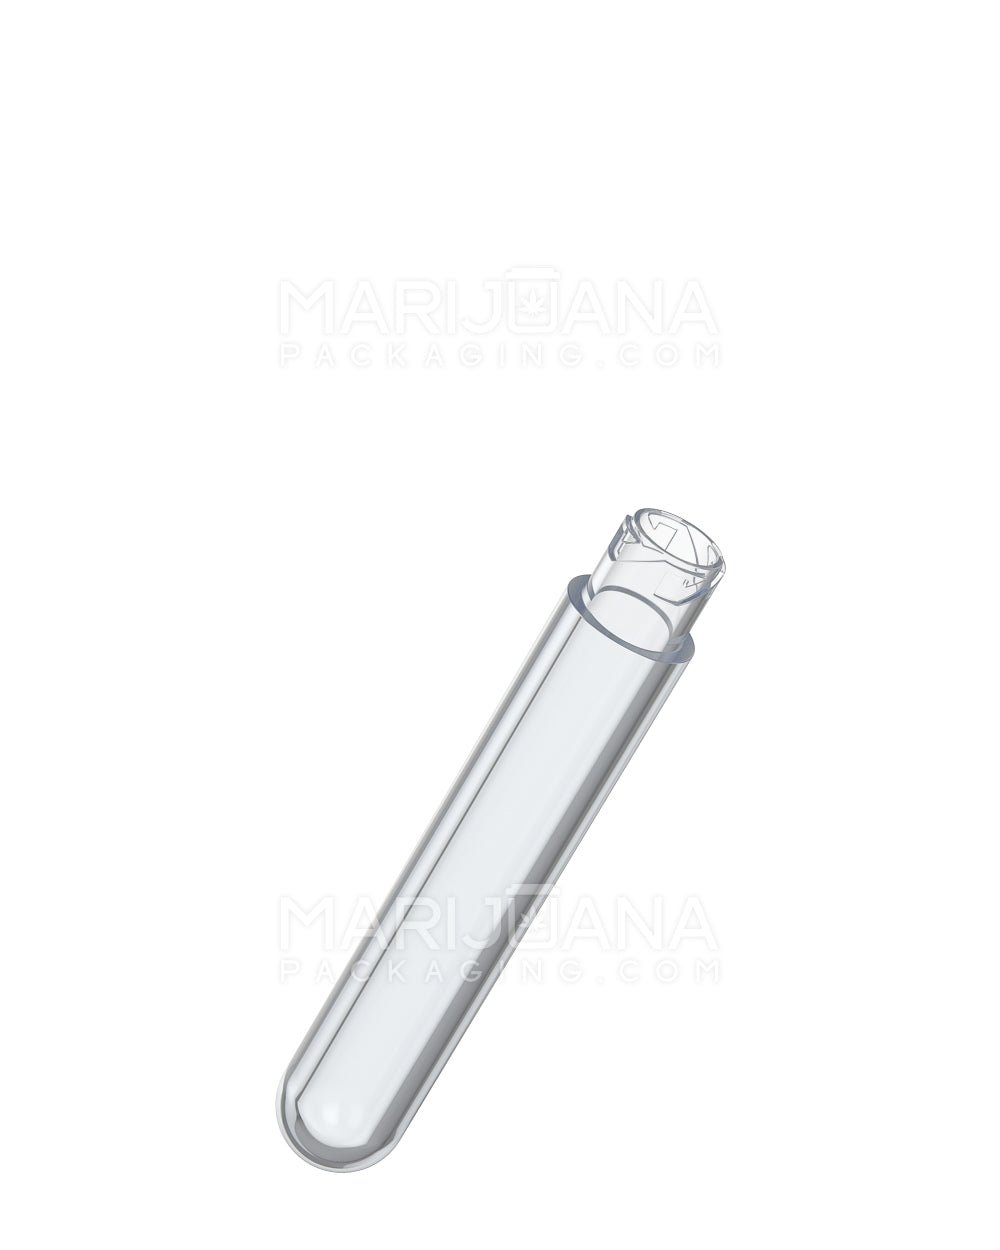 POLLEN GEAR | Transparent Pre-Roll & Vaporizer Tall Round Plastic Slim Tubes | 109mm - Clear - 1000 Count - 1